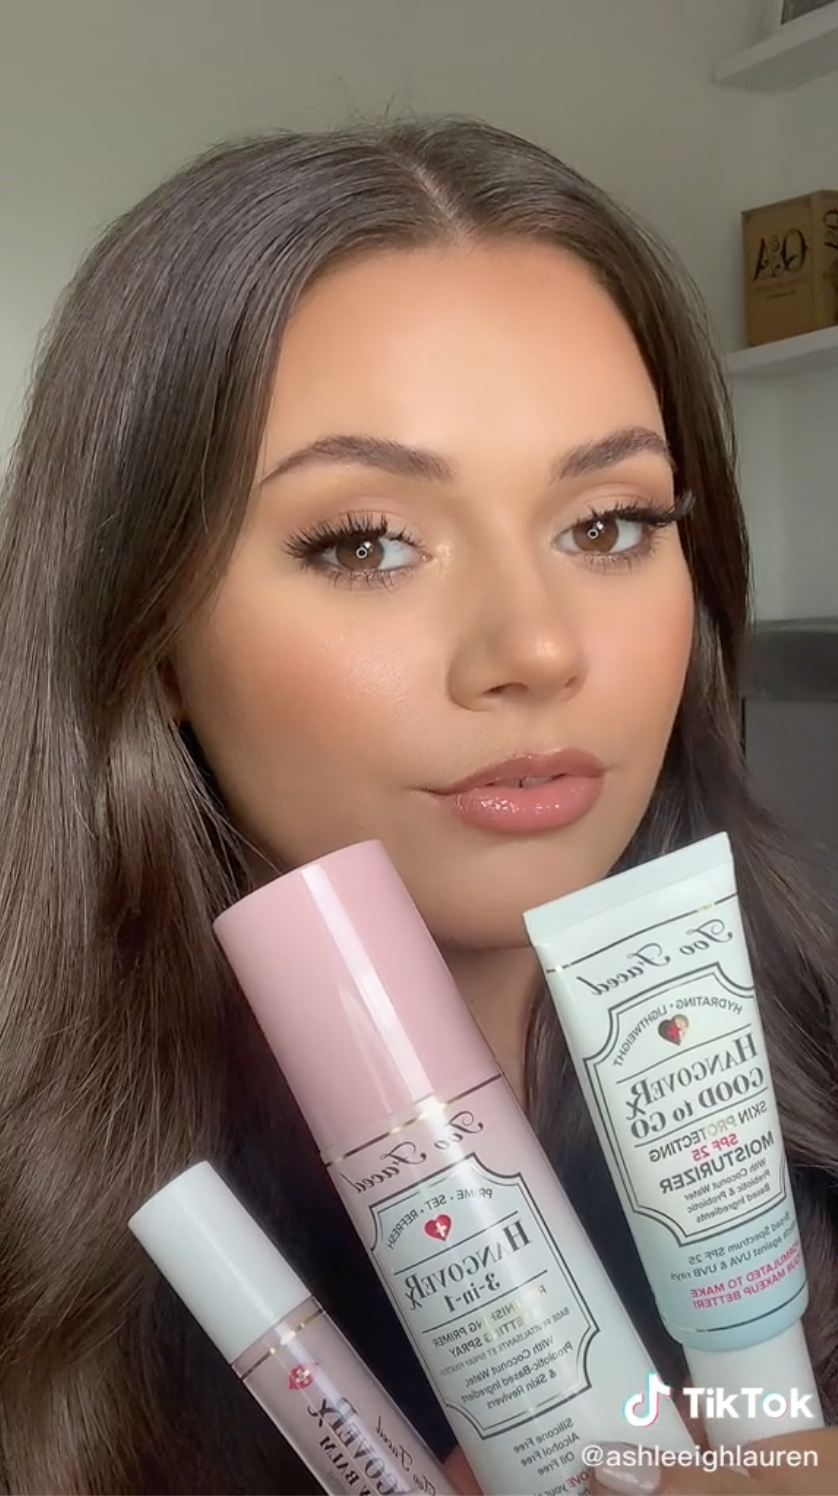 Top TikTok Influencers Who Helped Launch New Brands + Products in 2021